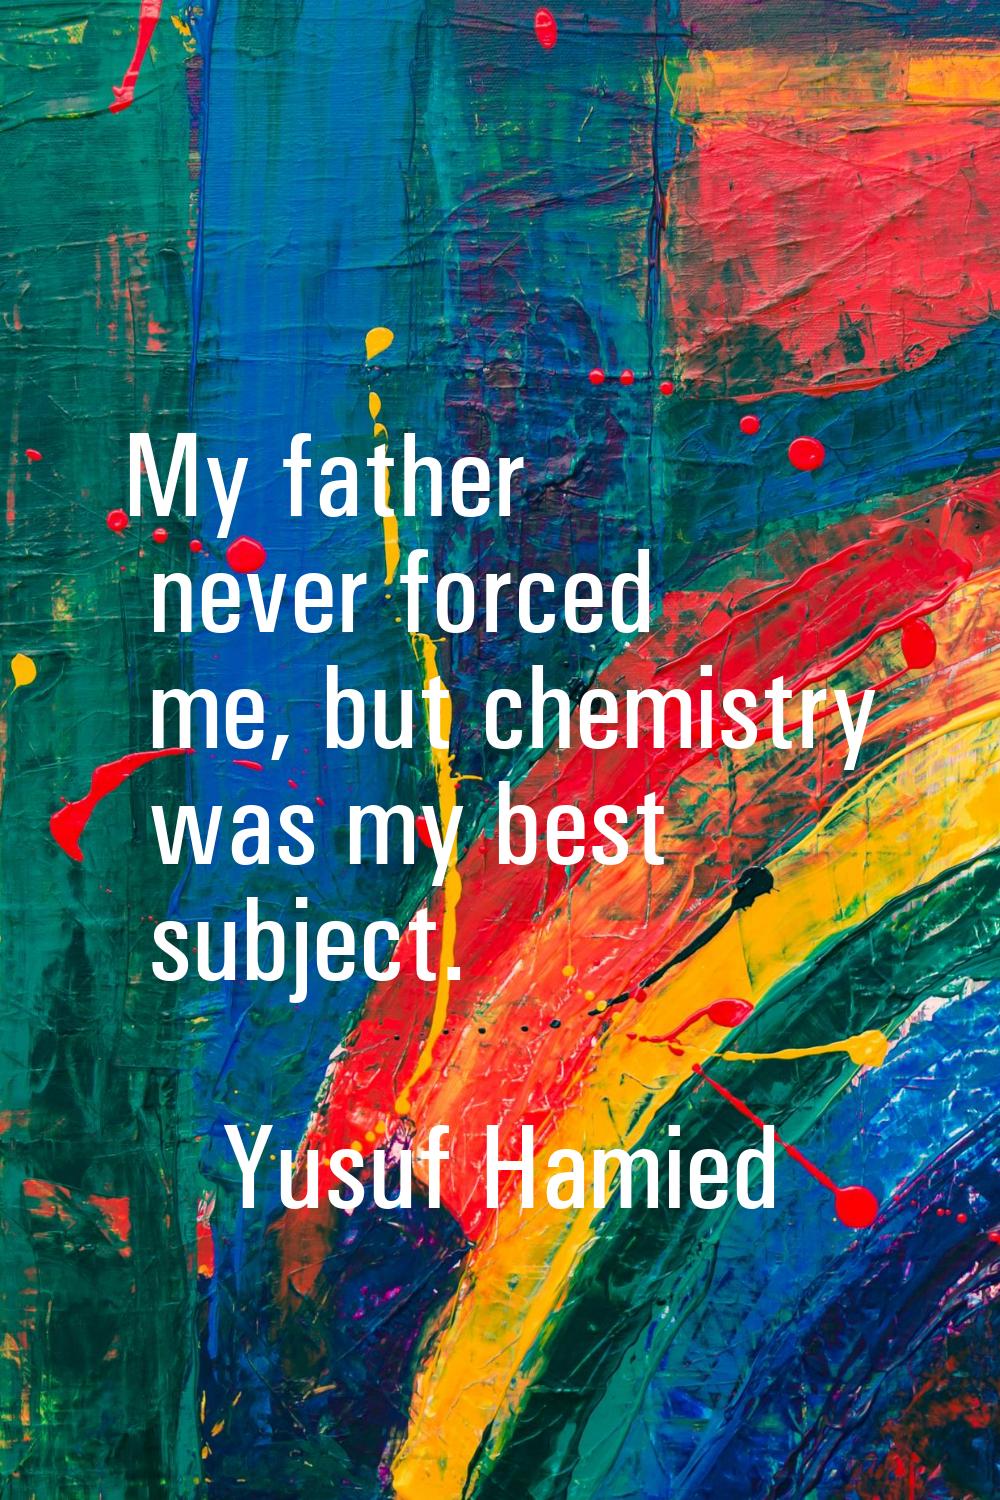 My father never forced me, but chemistry was my best subject.